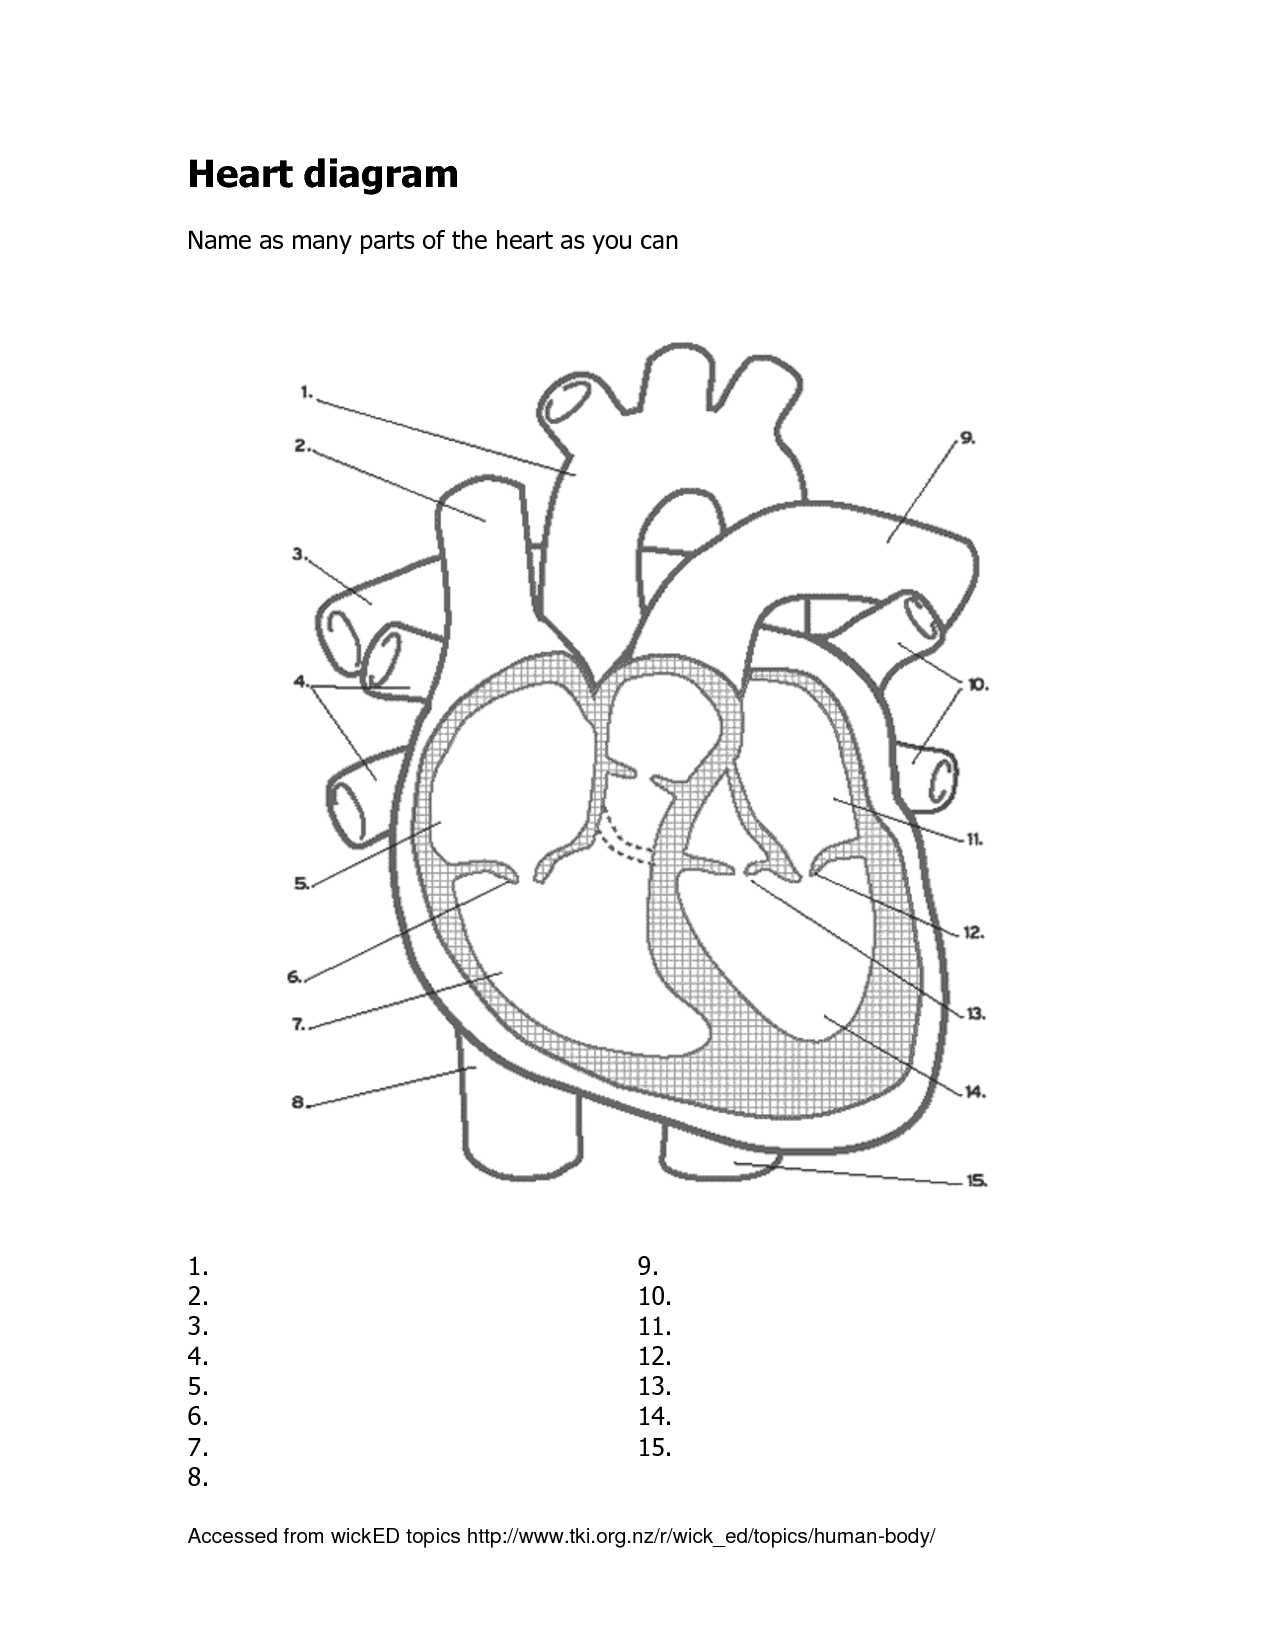 Human Heart Diagram Labeled | World of Reference